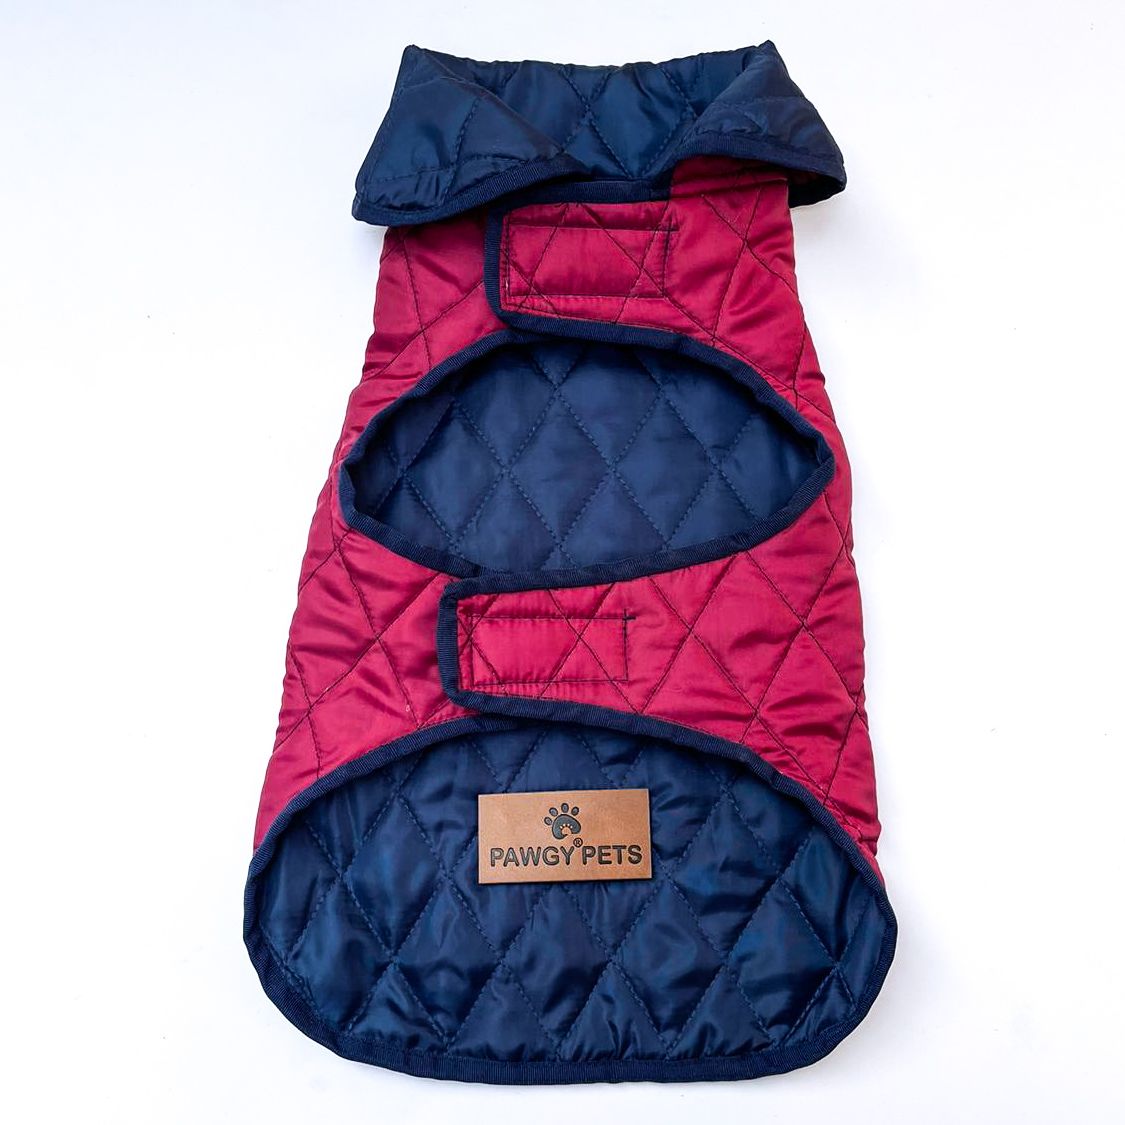 Pawgy Pets Reversible Quilted Jacket (Maroon & Navy Blue) for Dogs & Cats